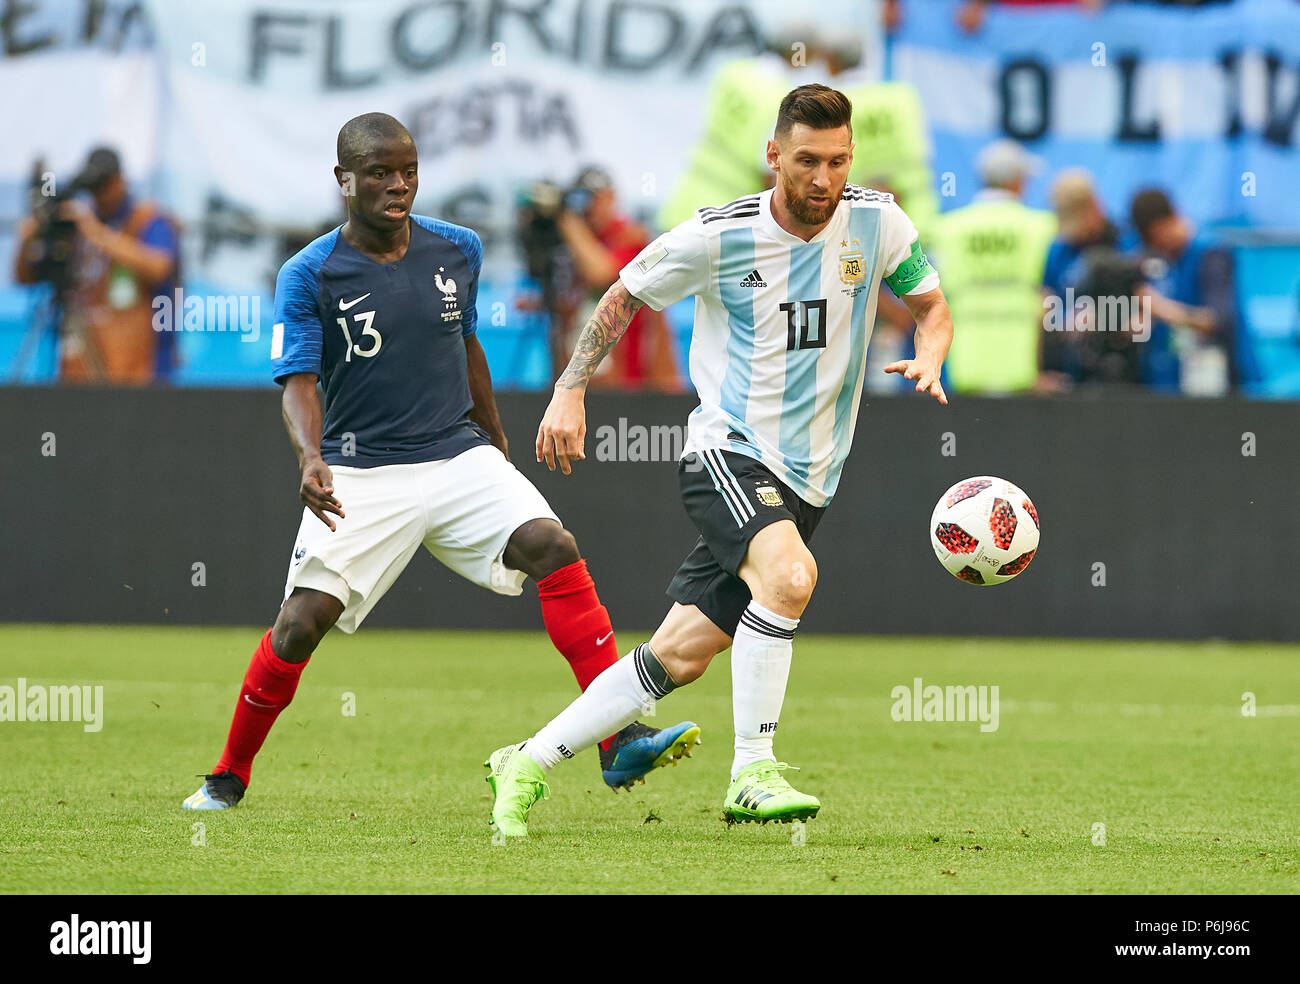 Kazan, Russia, June 30, 2018 Lionel MESSI, Argentina  10  compete for the ball, tackling, duel, header against Ngolo KANTE, FRA 13  ARGENTINA - FRANCE FIFA WORLD CUP 2018 RUSSIA, Best of 16 , Season 2018/2019,  June 30, 2018  Stadium K a z a n - A r e n a in Kazan, Russia. © Peter Schatz / Alamy Live News Stock Photo